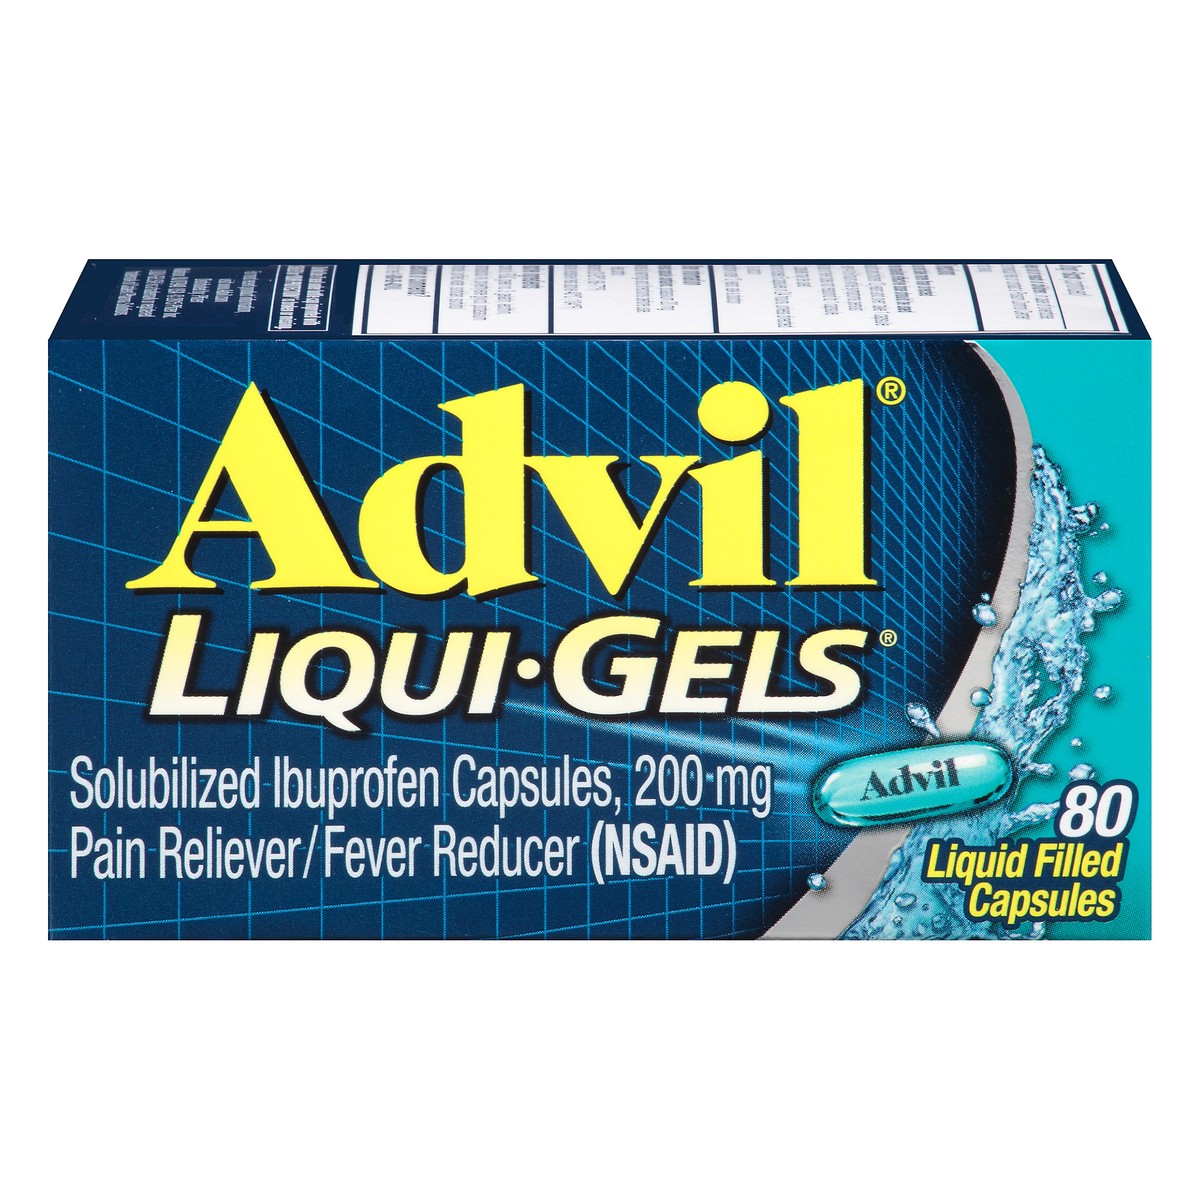 slide 1 of 7, Advil Liqui-Gels Pain Reliever and Fever Reducer, Ibuprofen 200mg for Pain Relief - 80 Liquid Filled Capsules, 80 ct